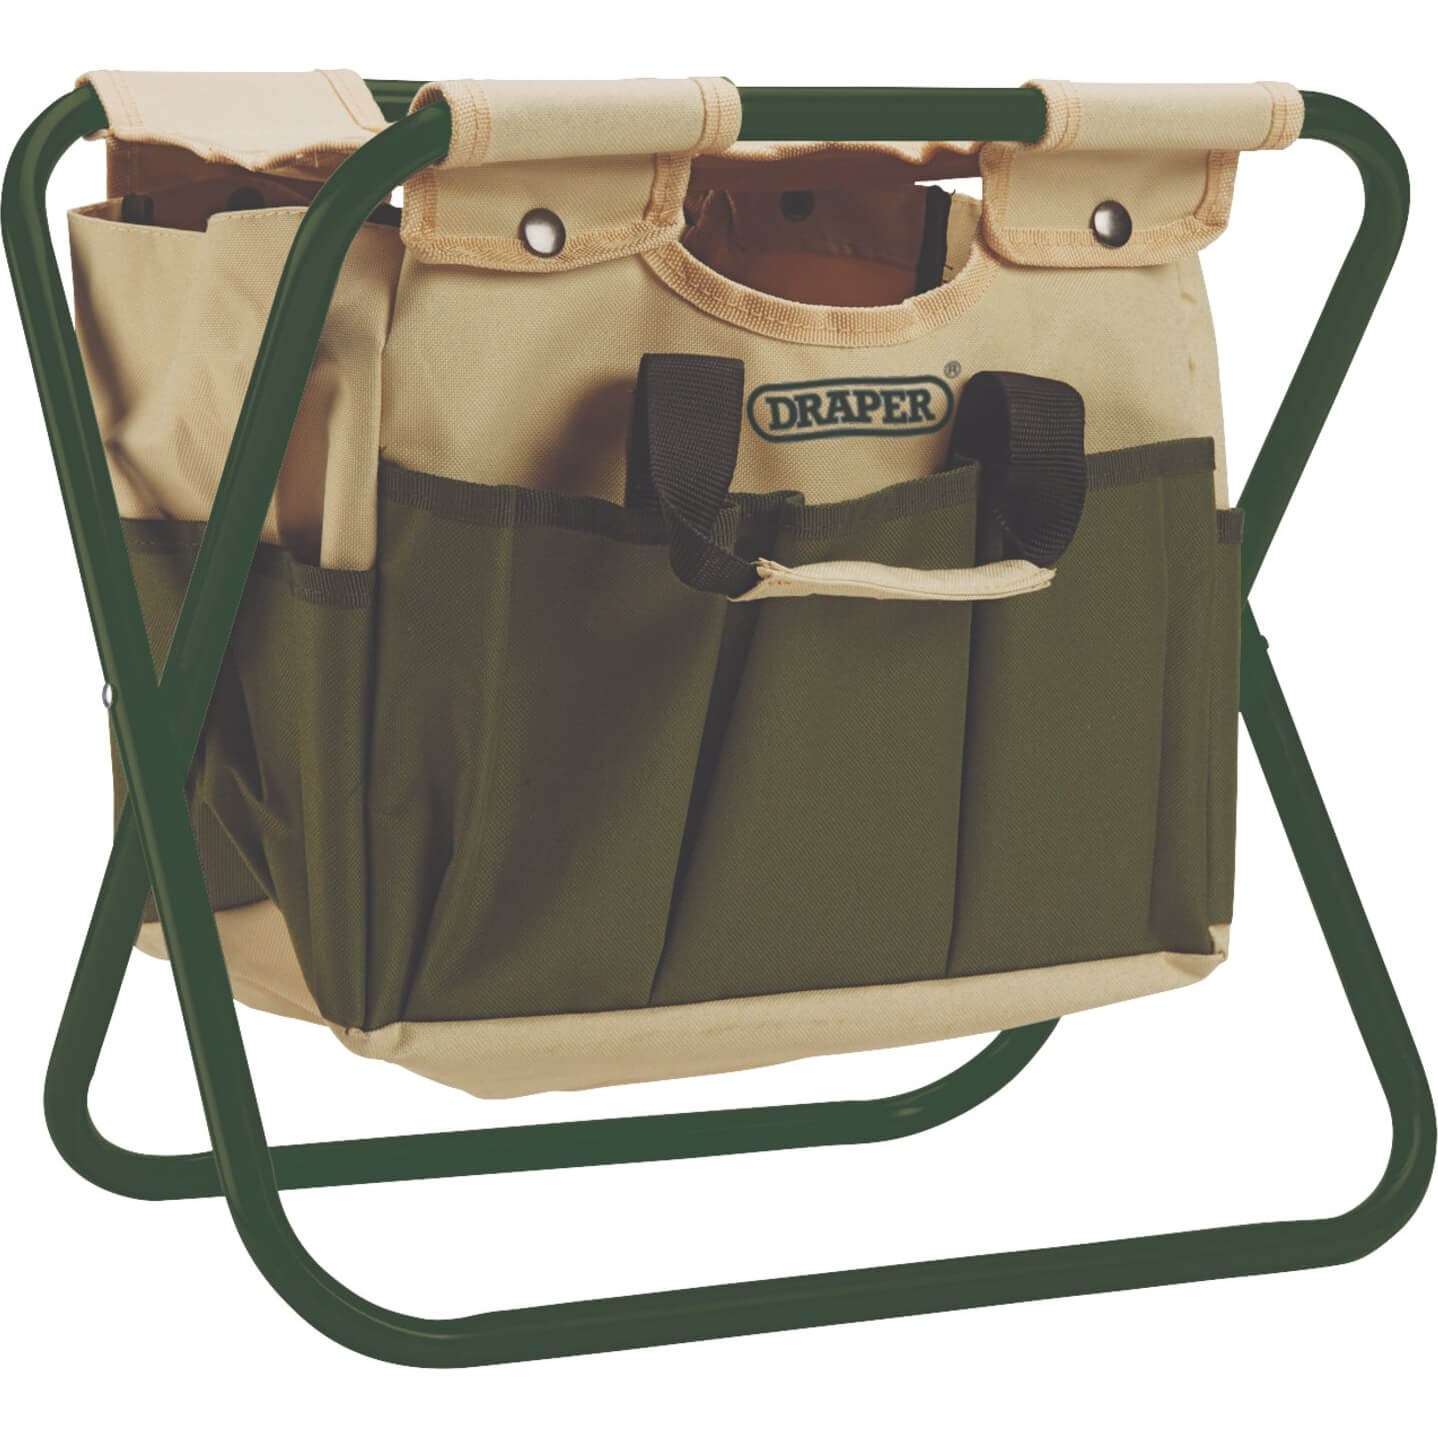 Image of Draper 2 in 1 Foldable Seat and Tool Bag